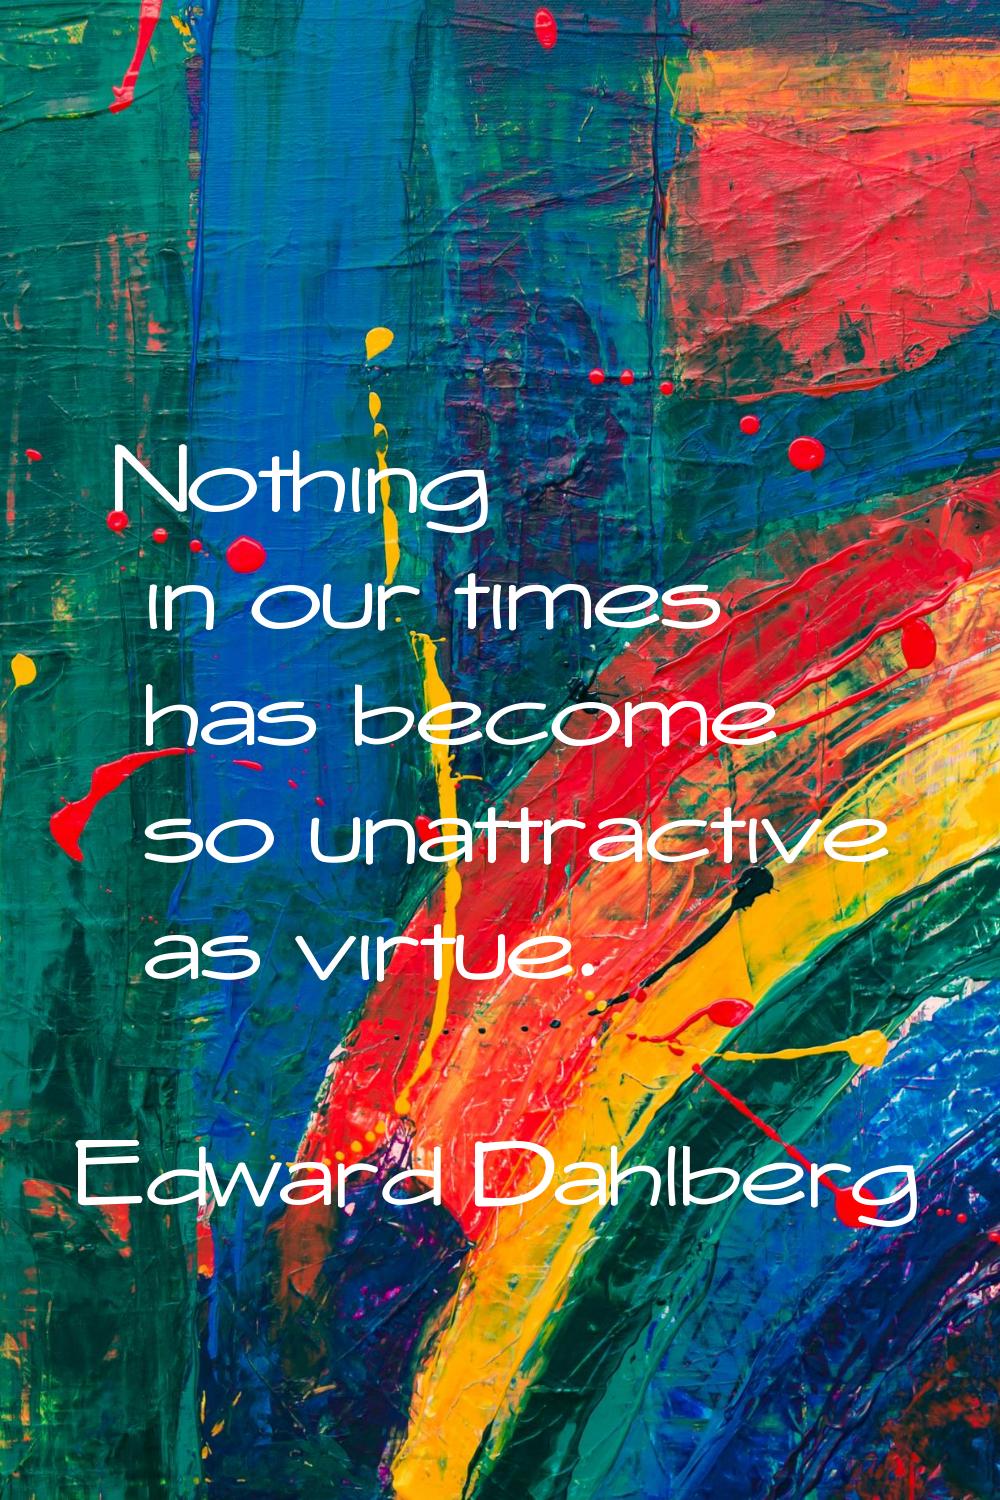 Nothing in our times has become so unattractive as virtue.